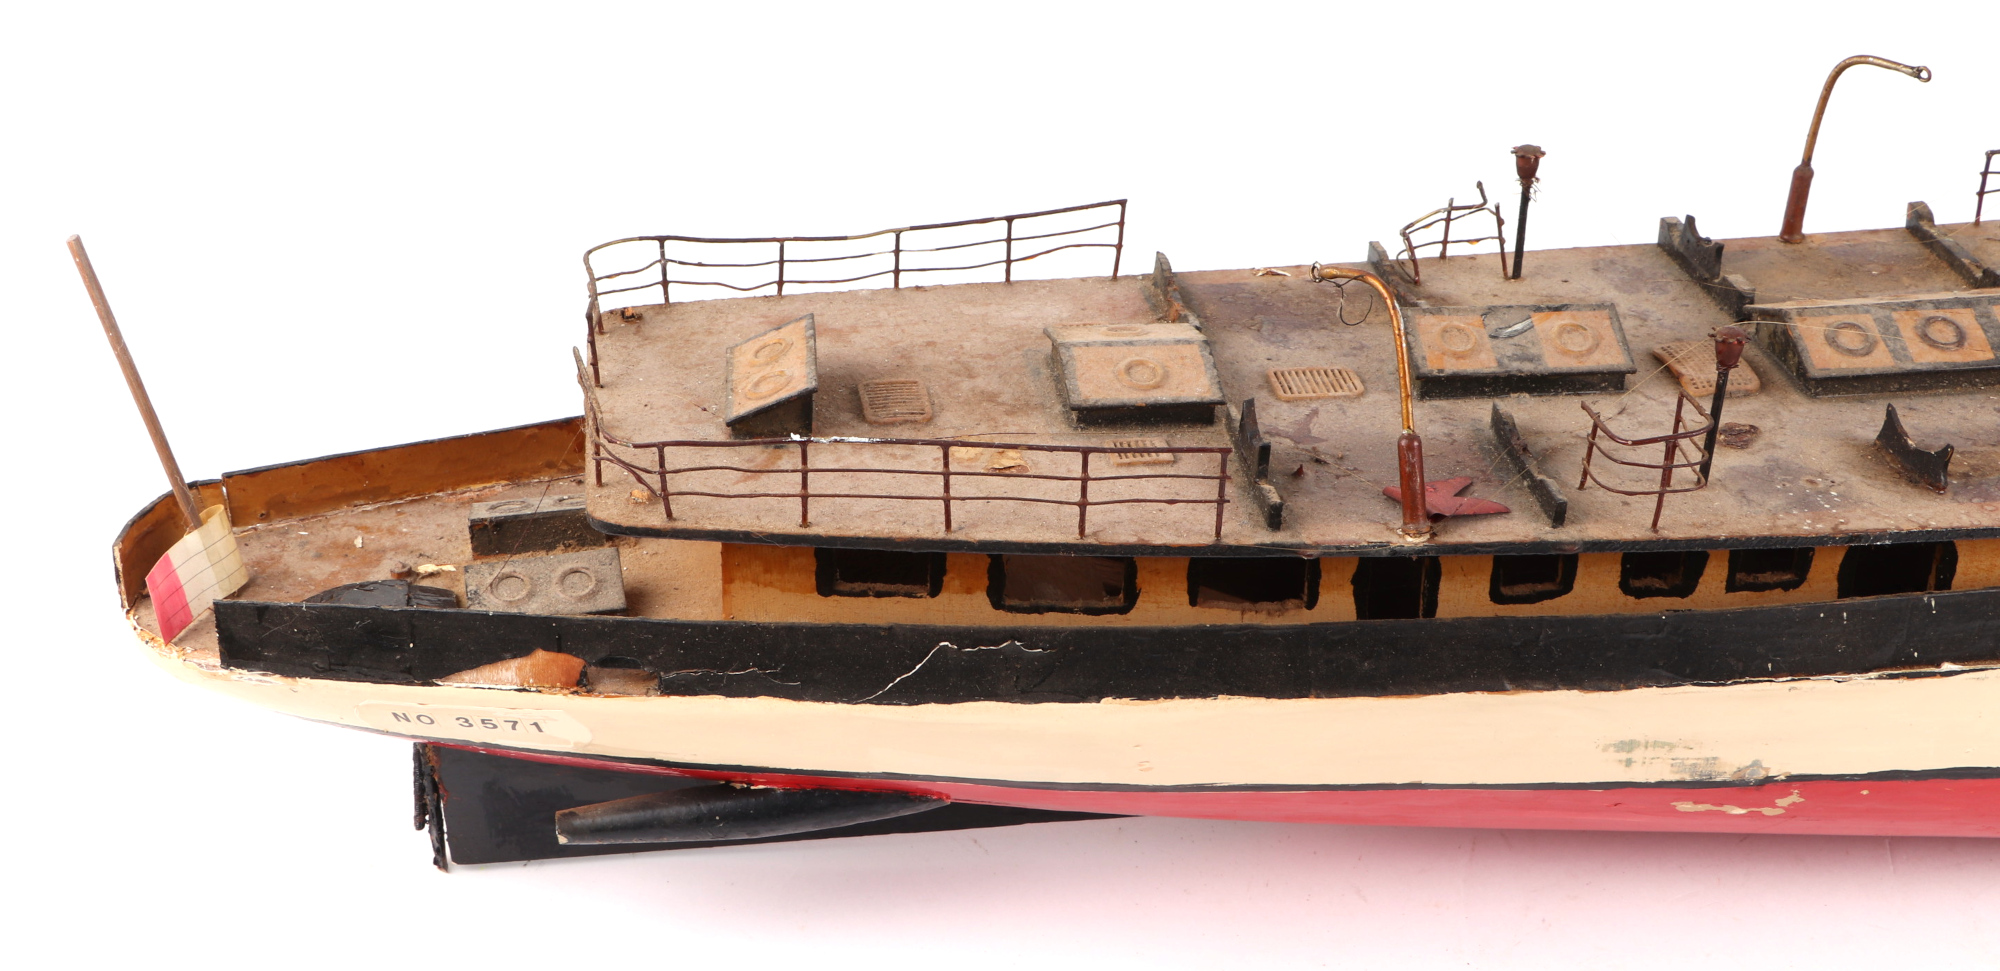 A scratch built model of a warship with painted wooden hull, approx 125cm long; together with - Image 9 of 13